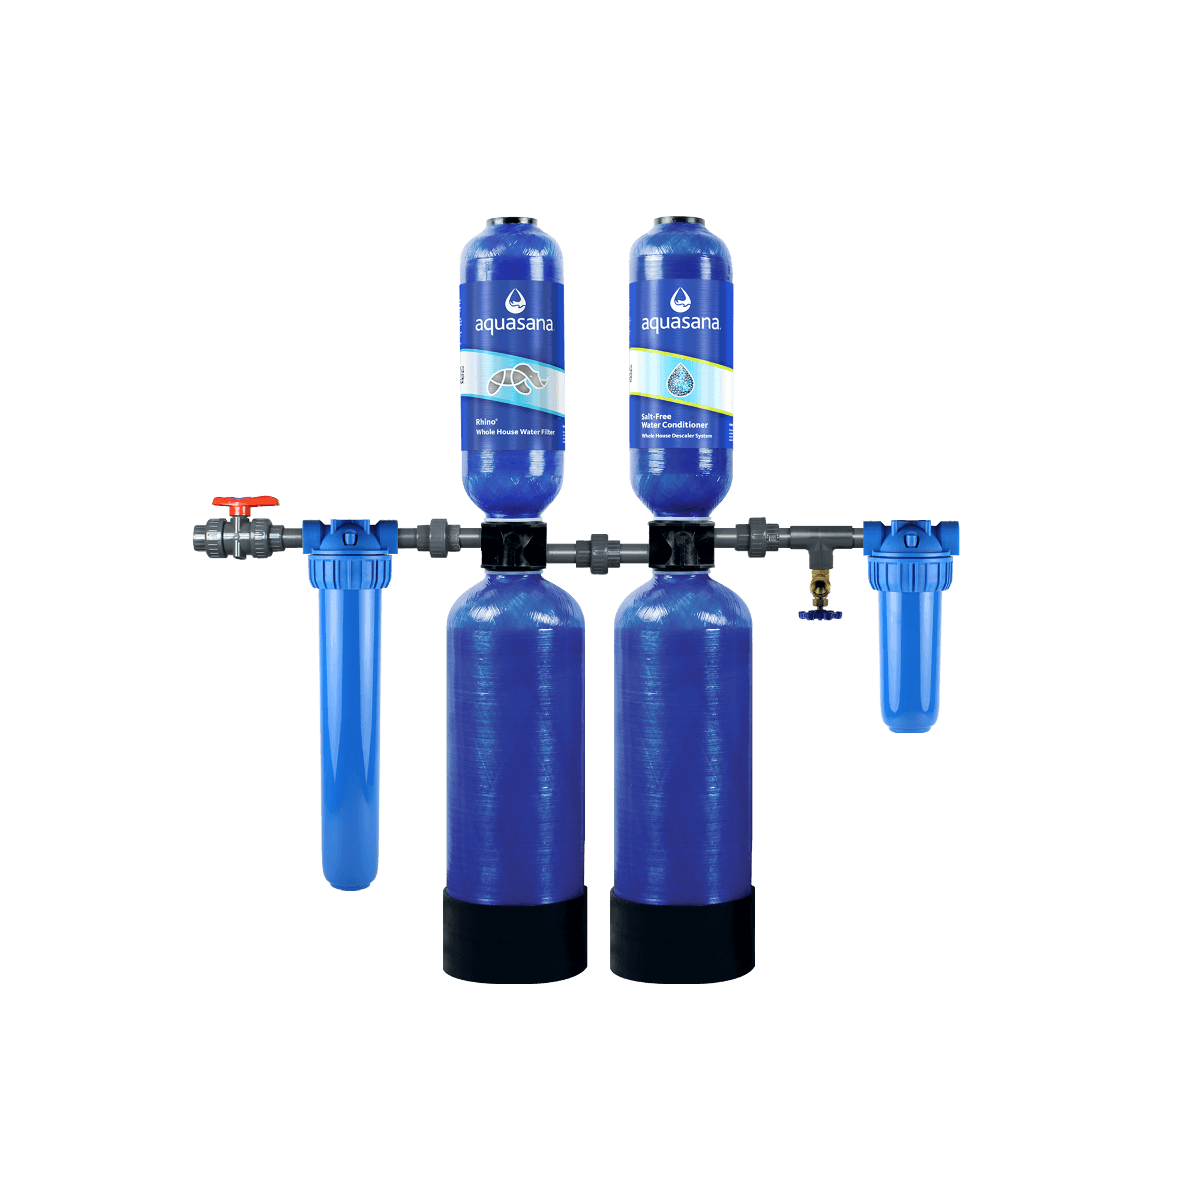 Rhino Whole House Water Filter System With Salt-Free Water Conditioner Home Water Filtration 10/1,000,000 Aquasana photo